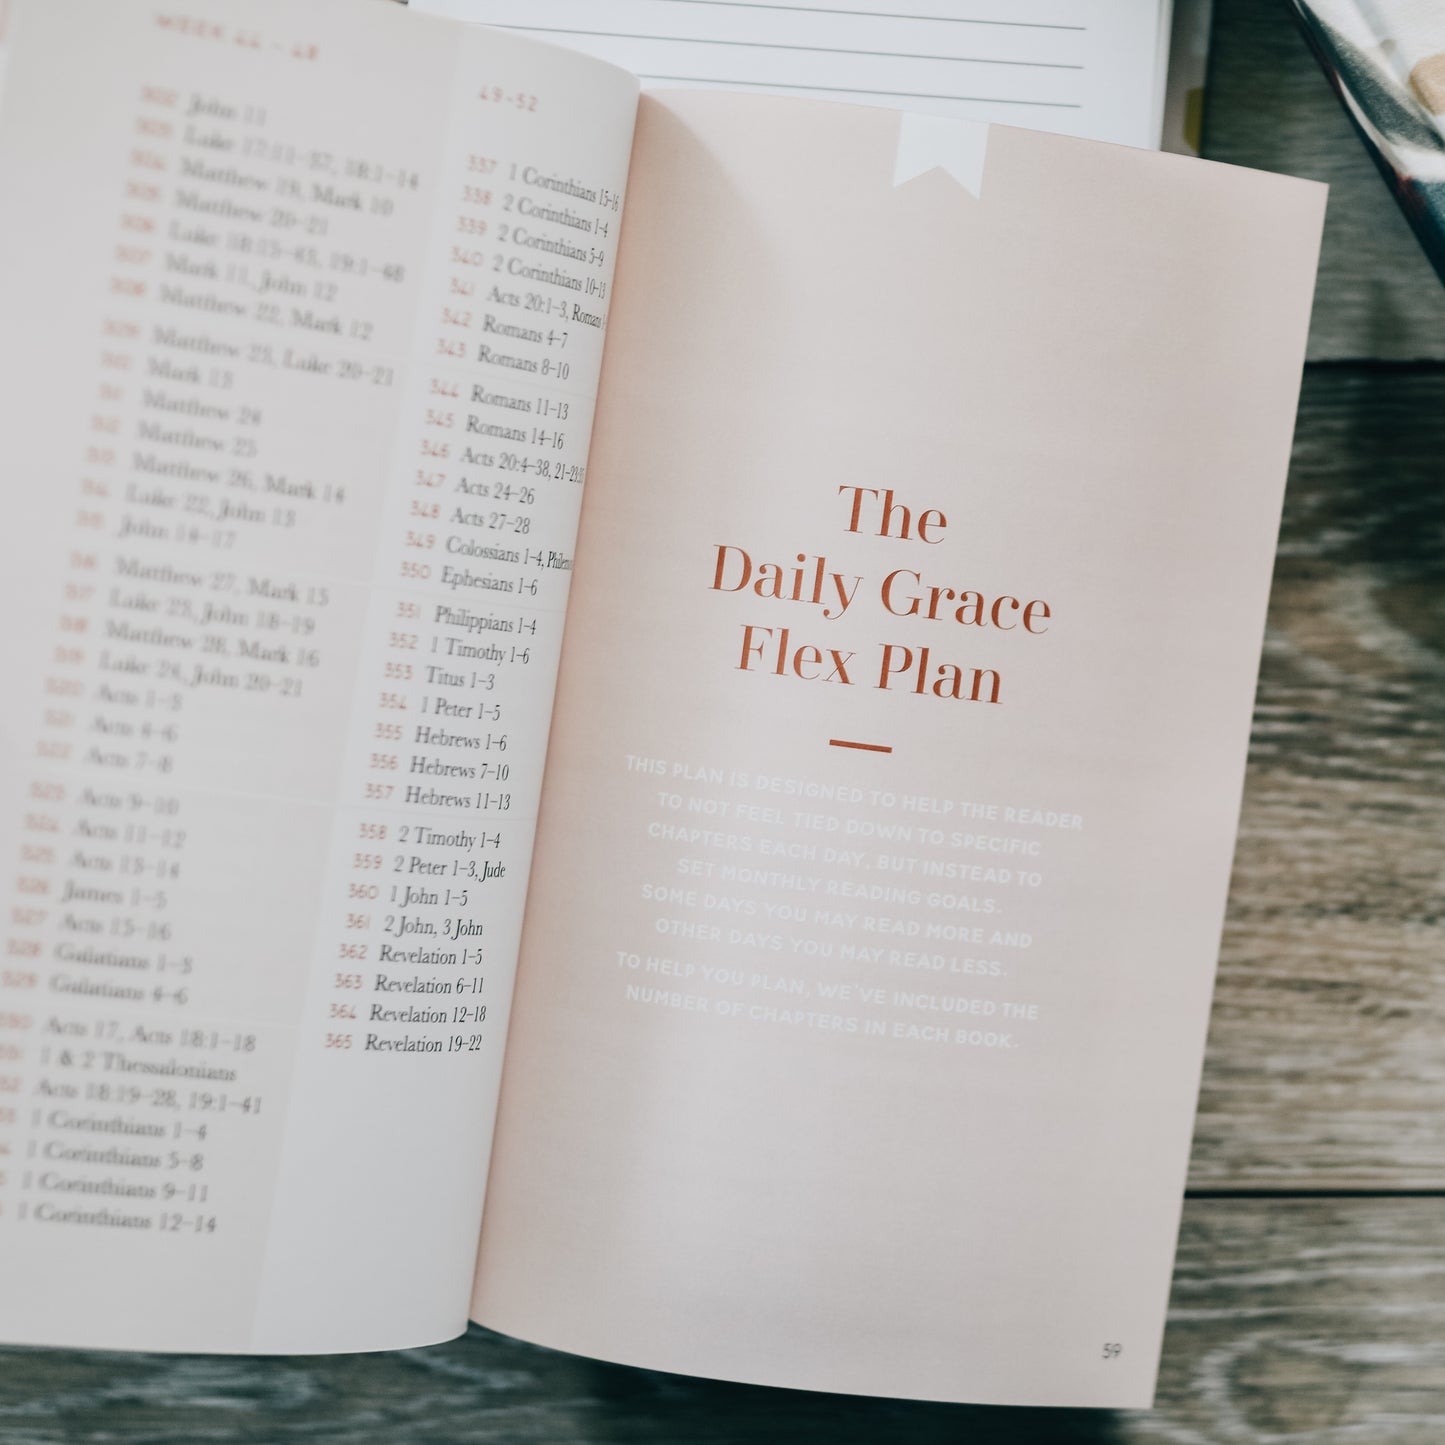 Seasons in the Word | Bible Reading Plans